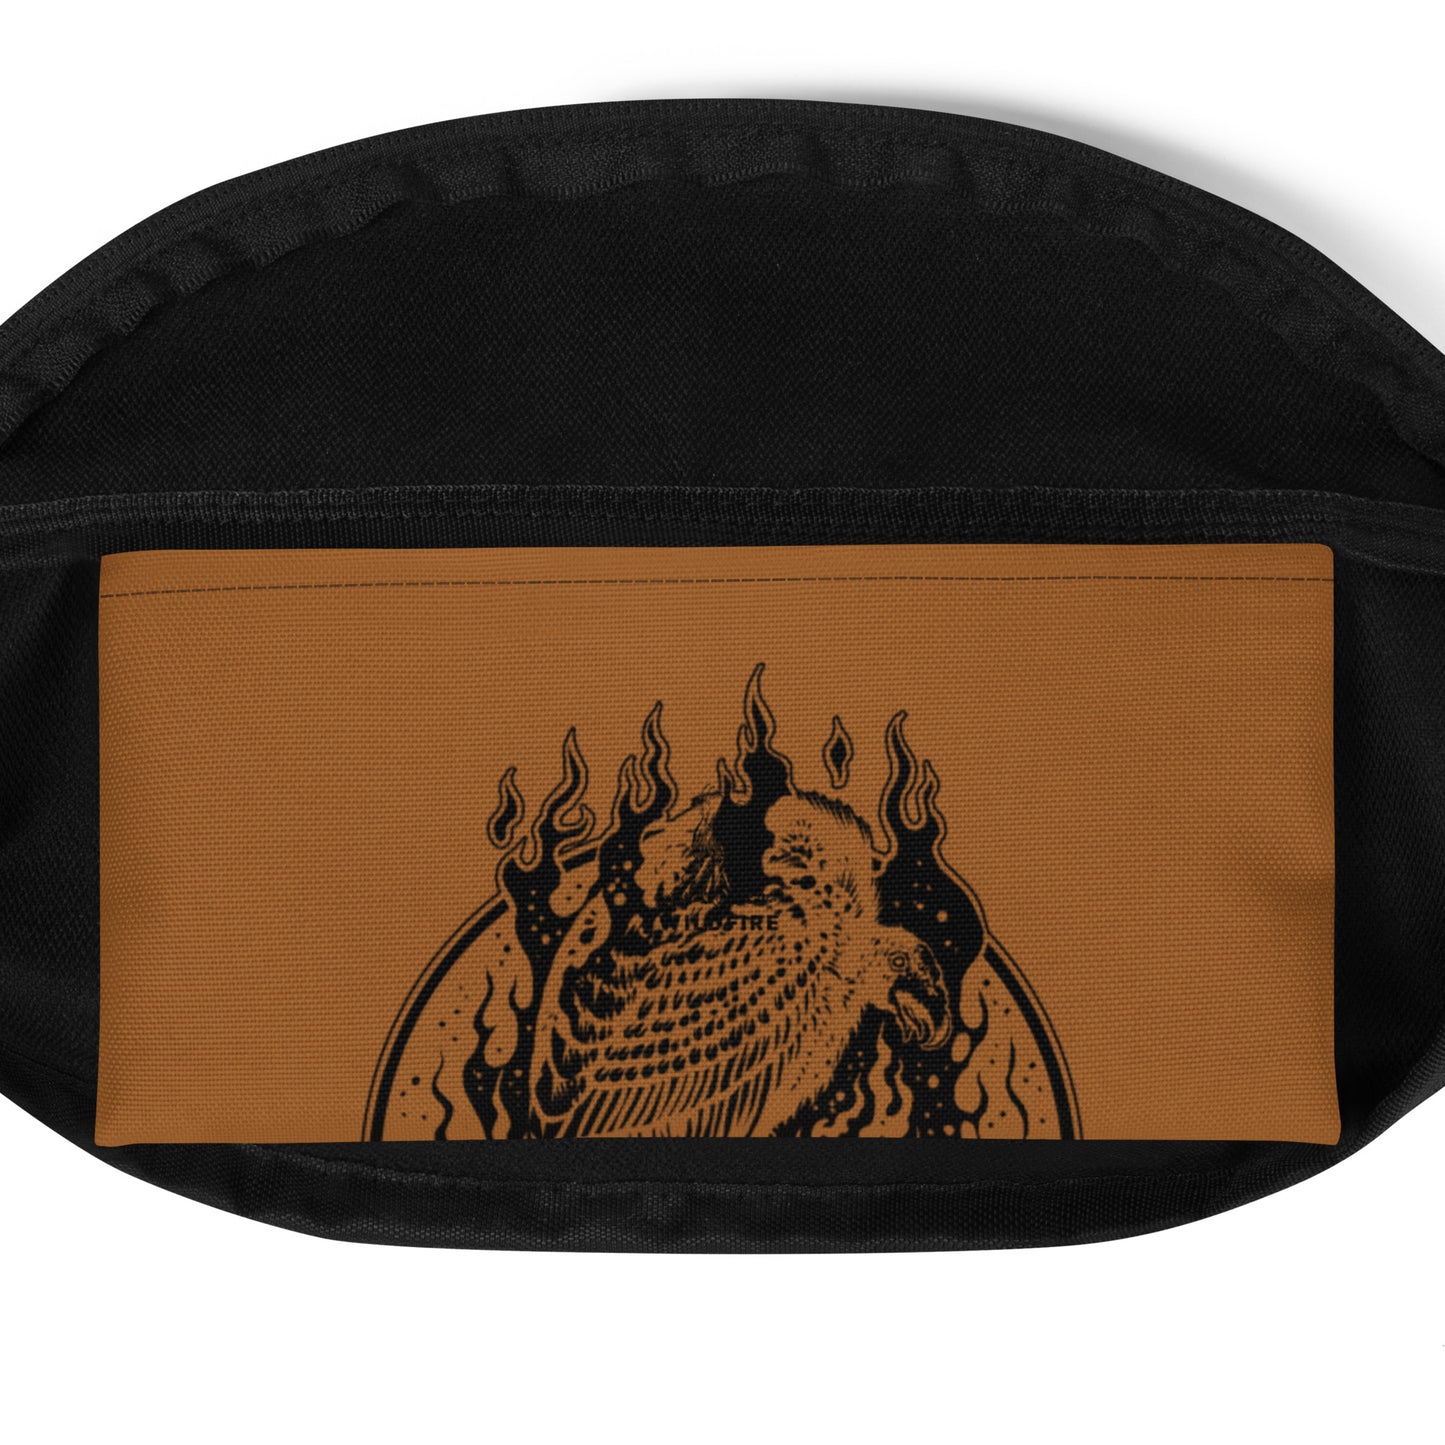 Wildfire Cigars retro striped fanny pack details